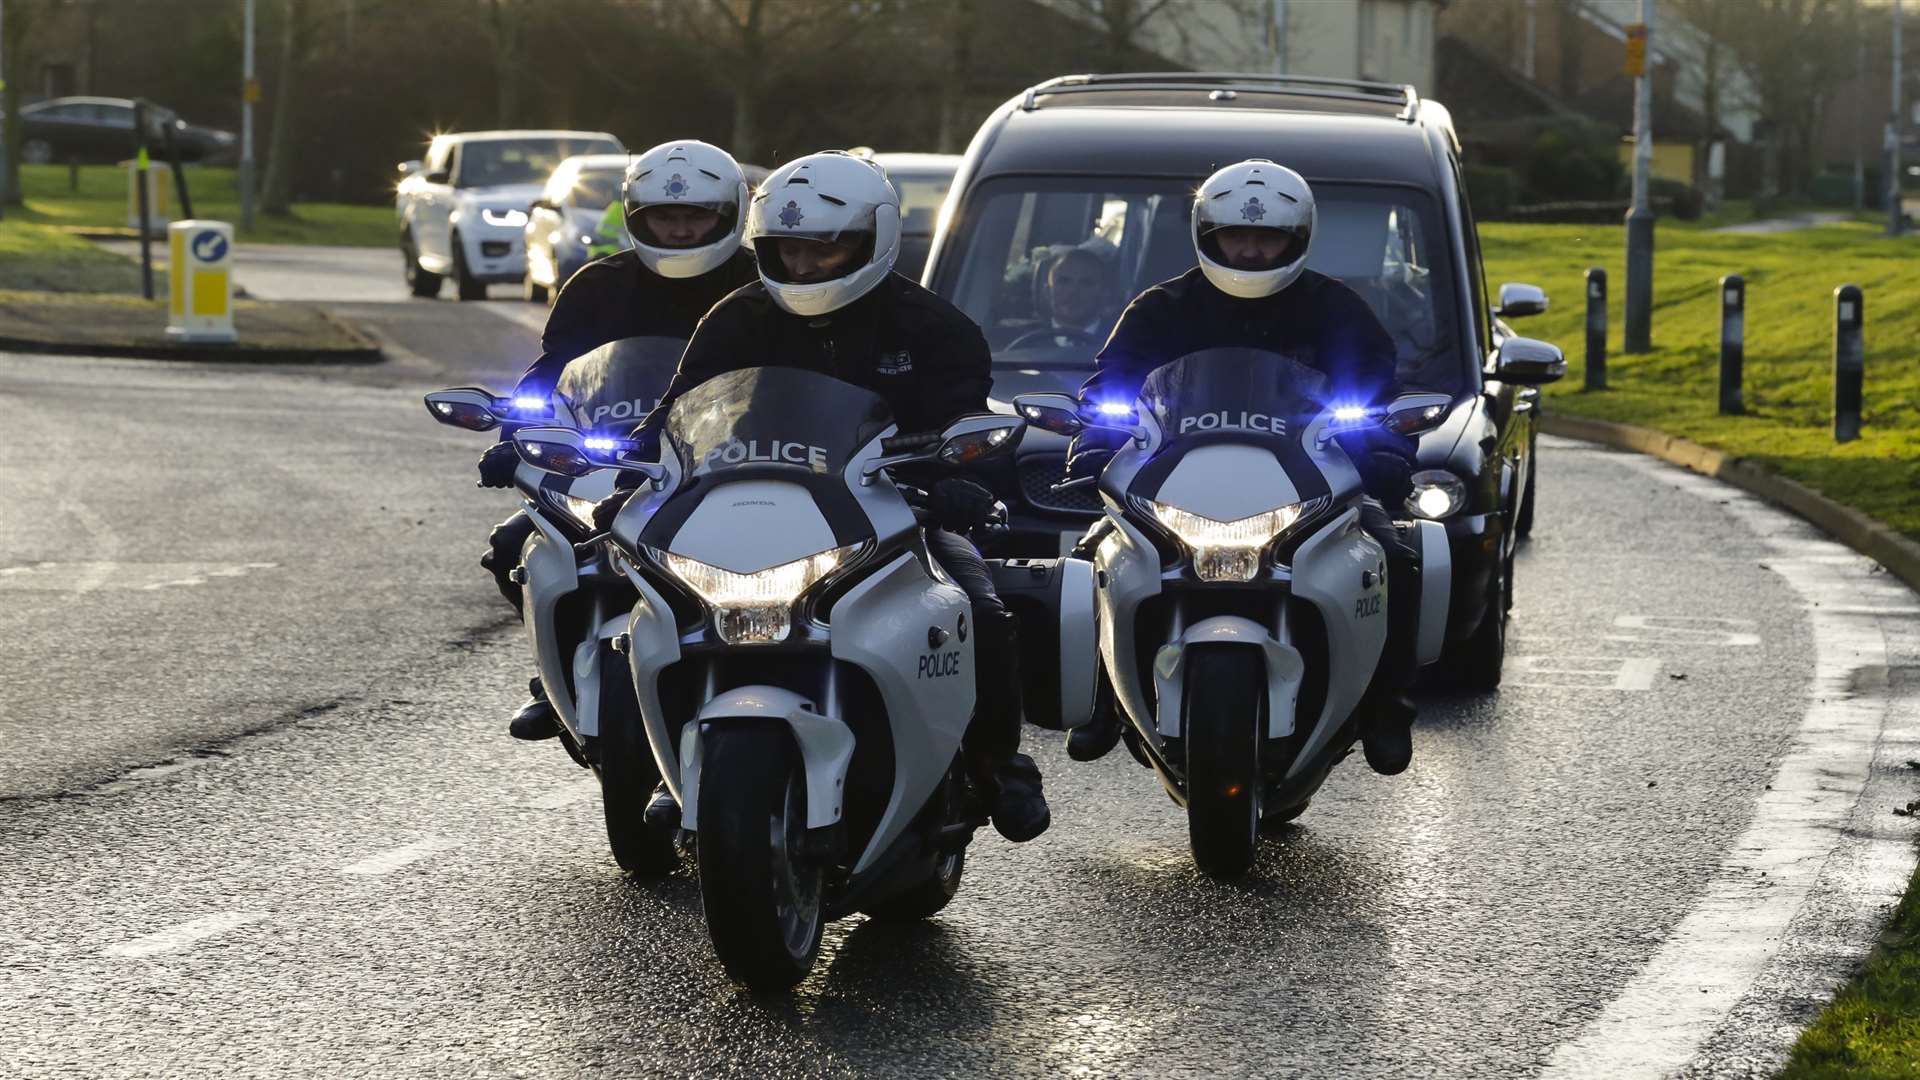 His funeral cortege was escorted by a group of Met Police motorbikes